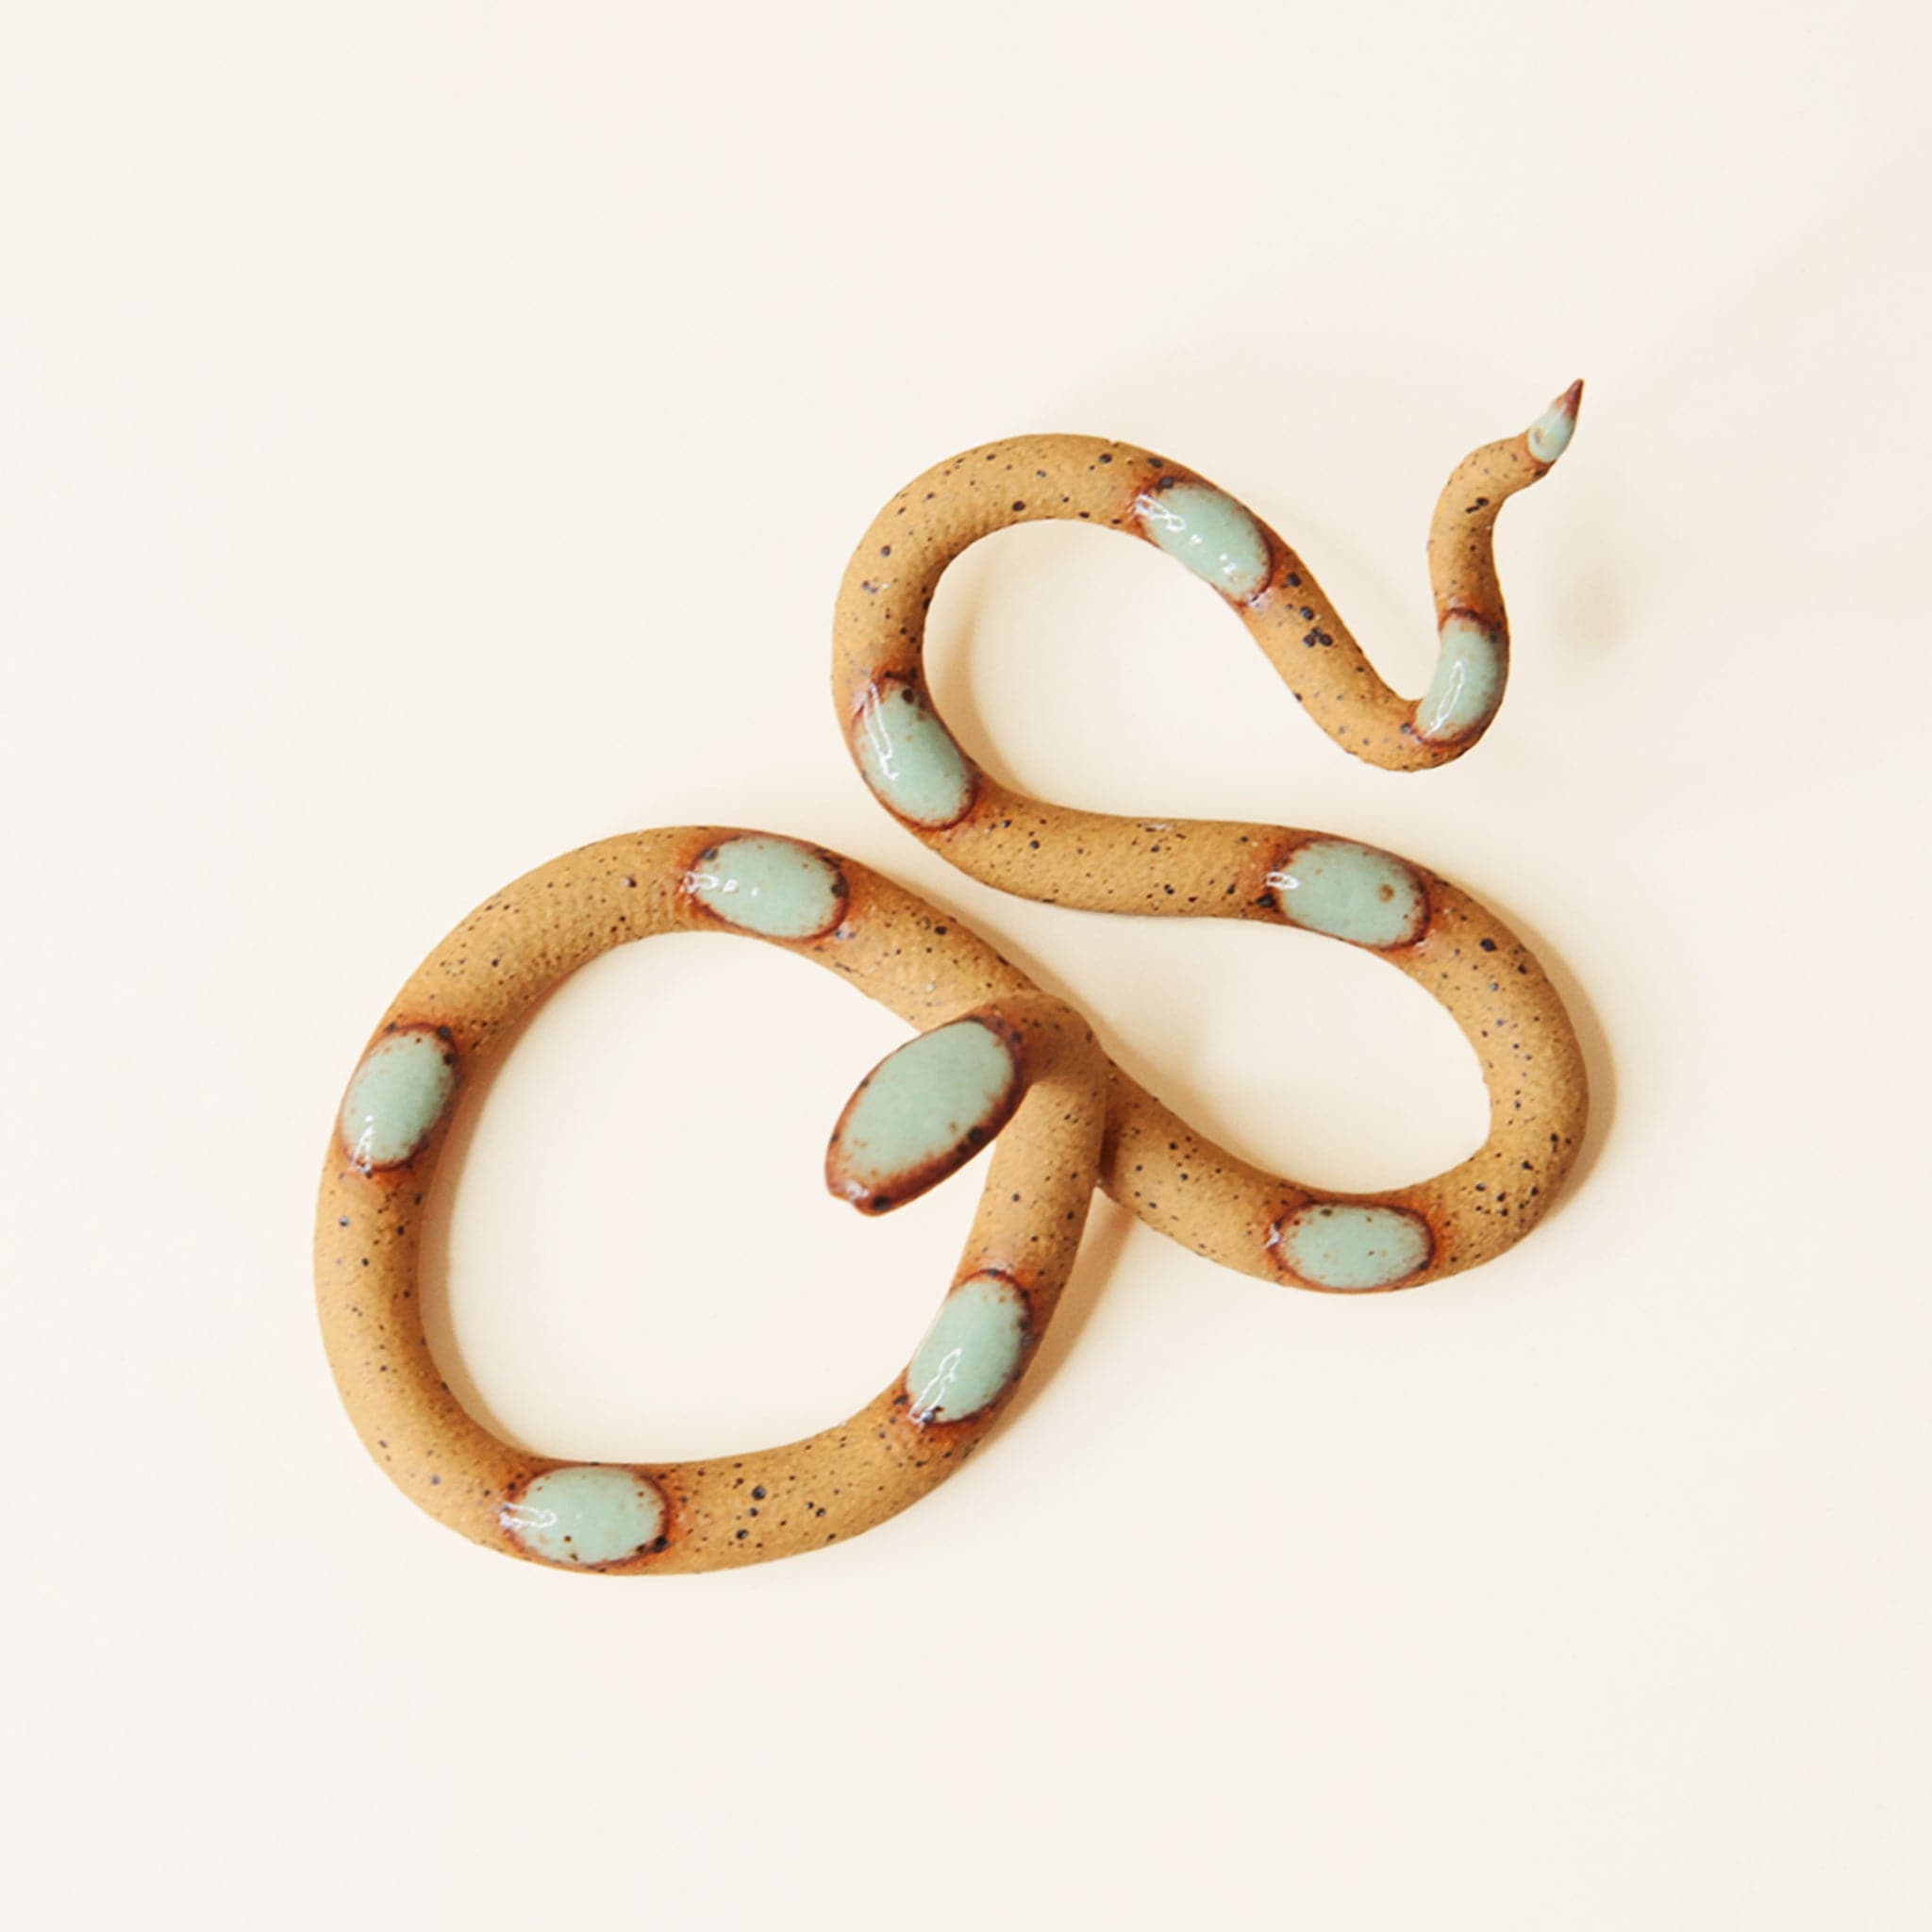 In front of a tan background is a brown ceramic snake. The snake is speckled light brown with light blue spots. 